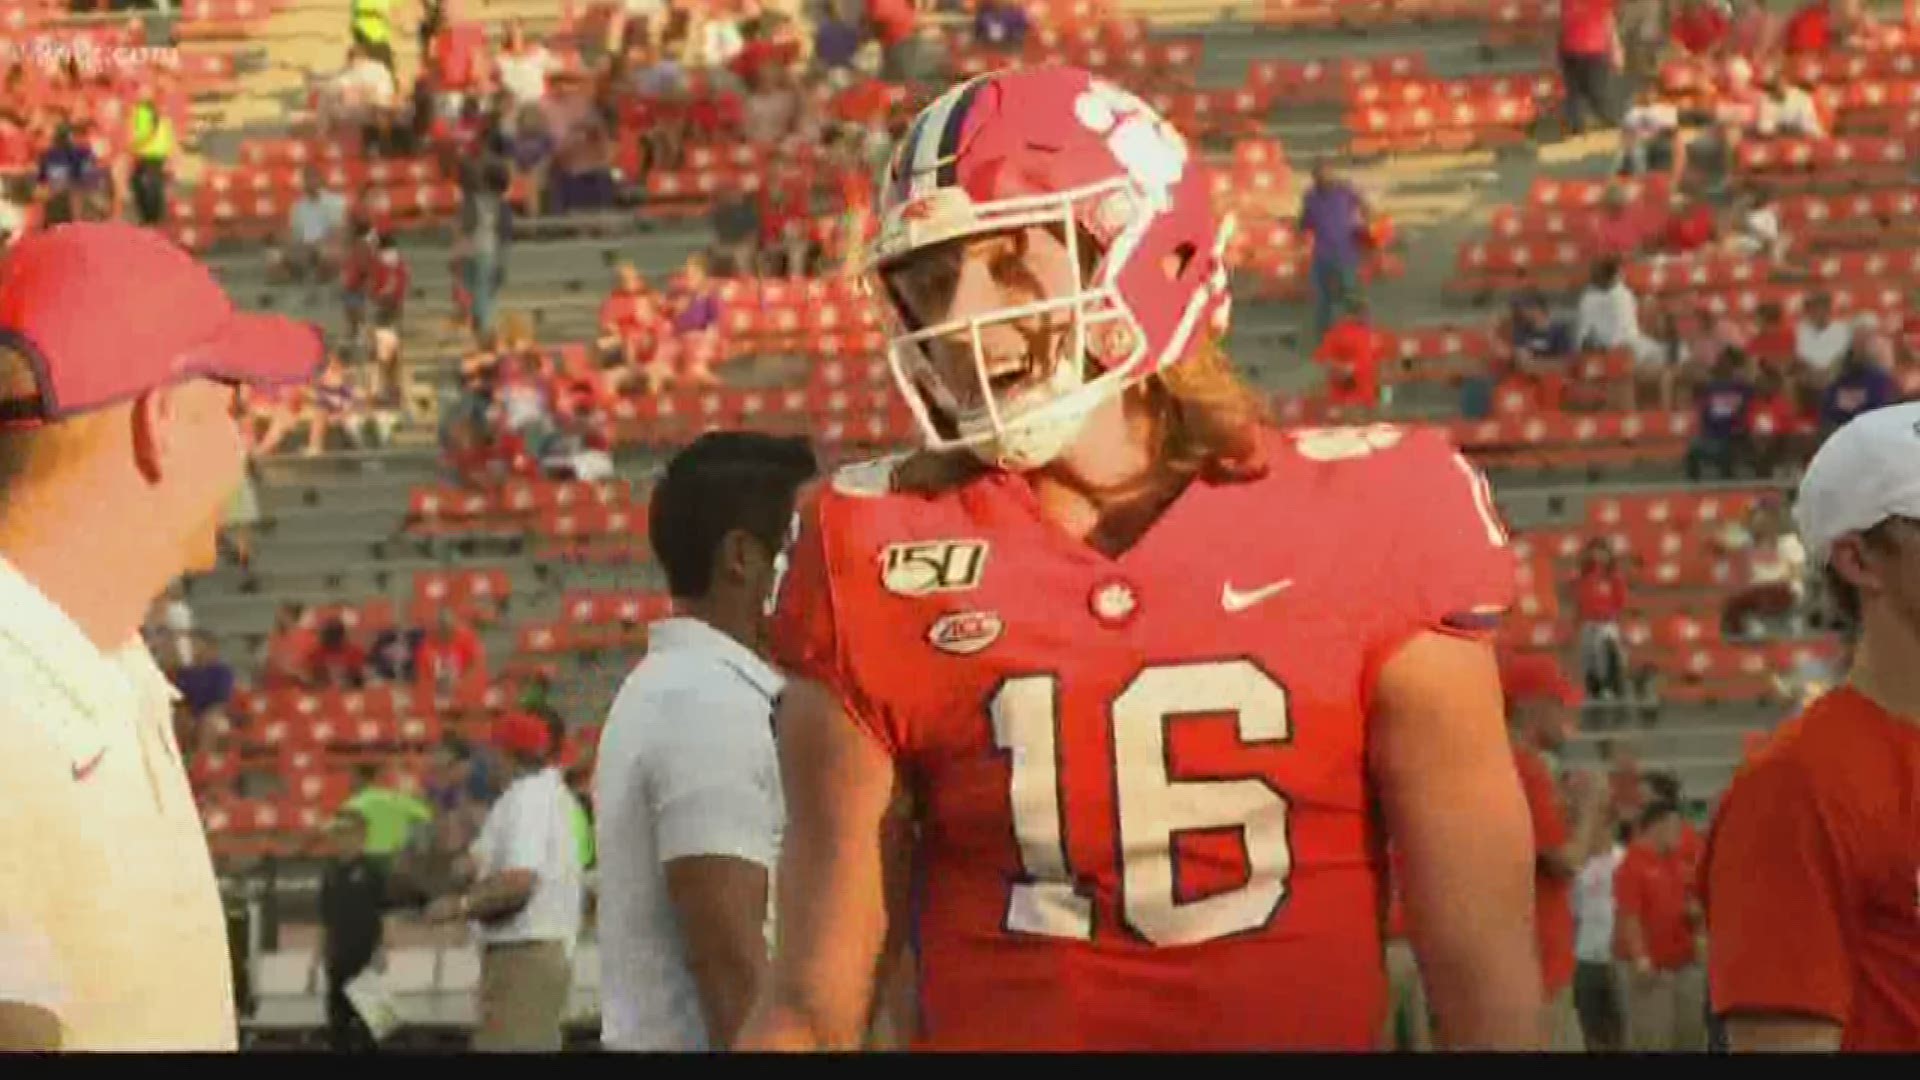 Clemson quarterback Trevor Lawrence will receive an award from the South Carolina Football Hall of Fame, an award with ties to the Heisman Trophy.